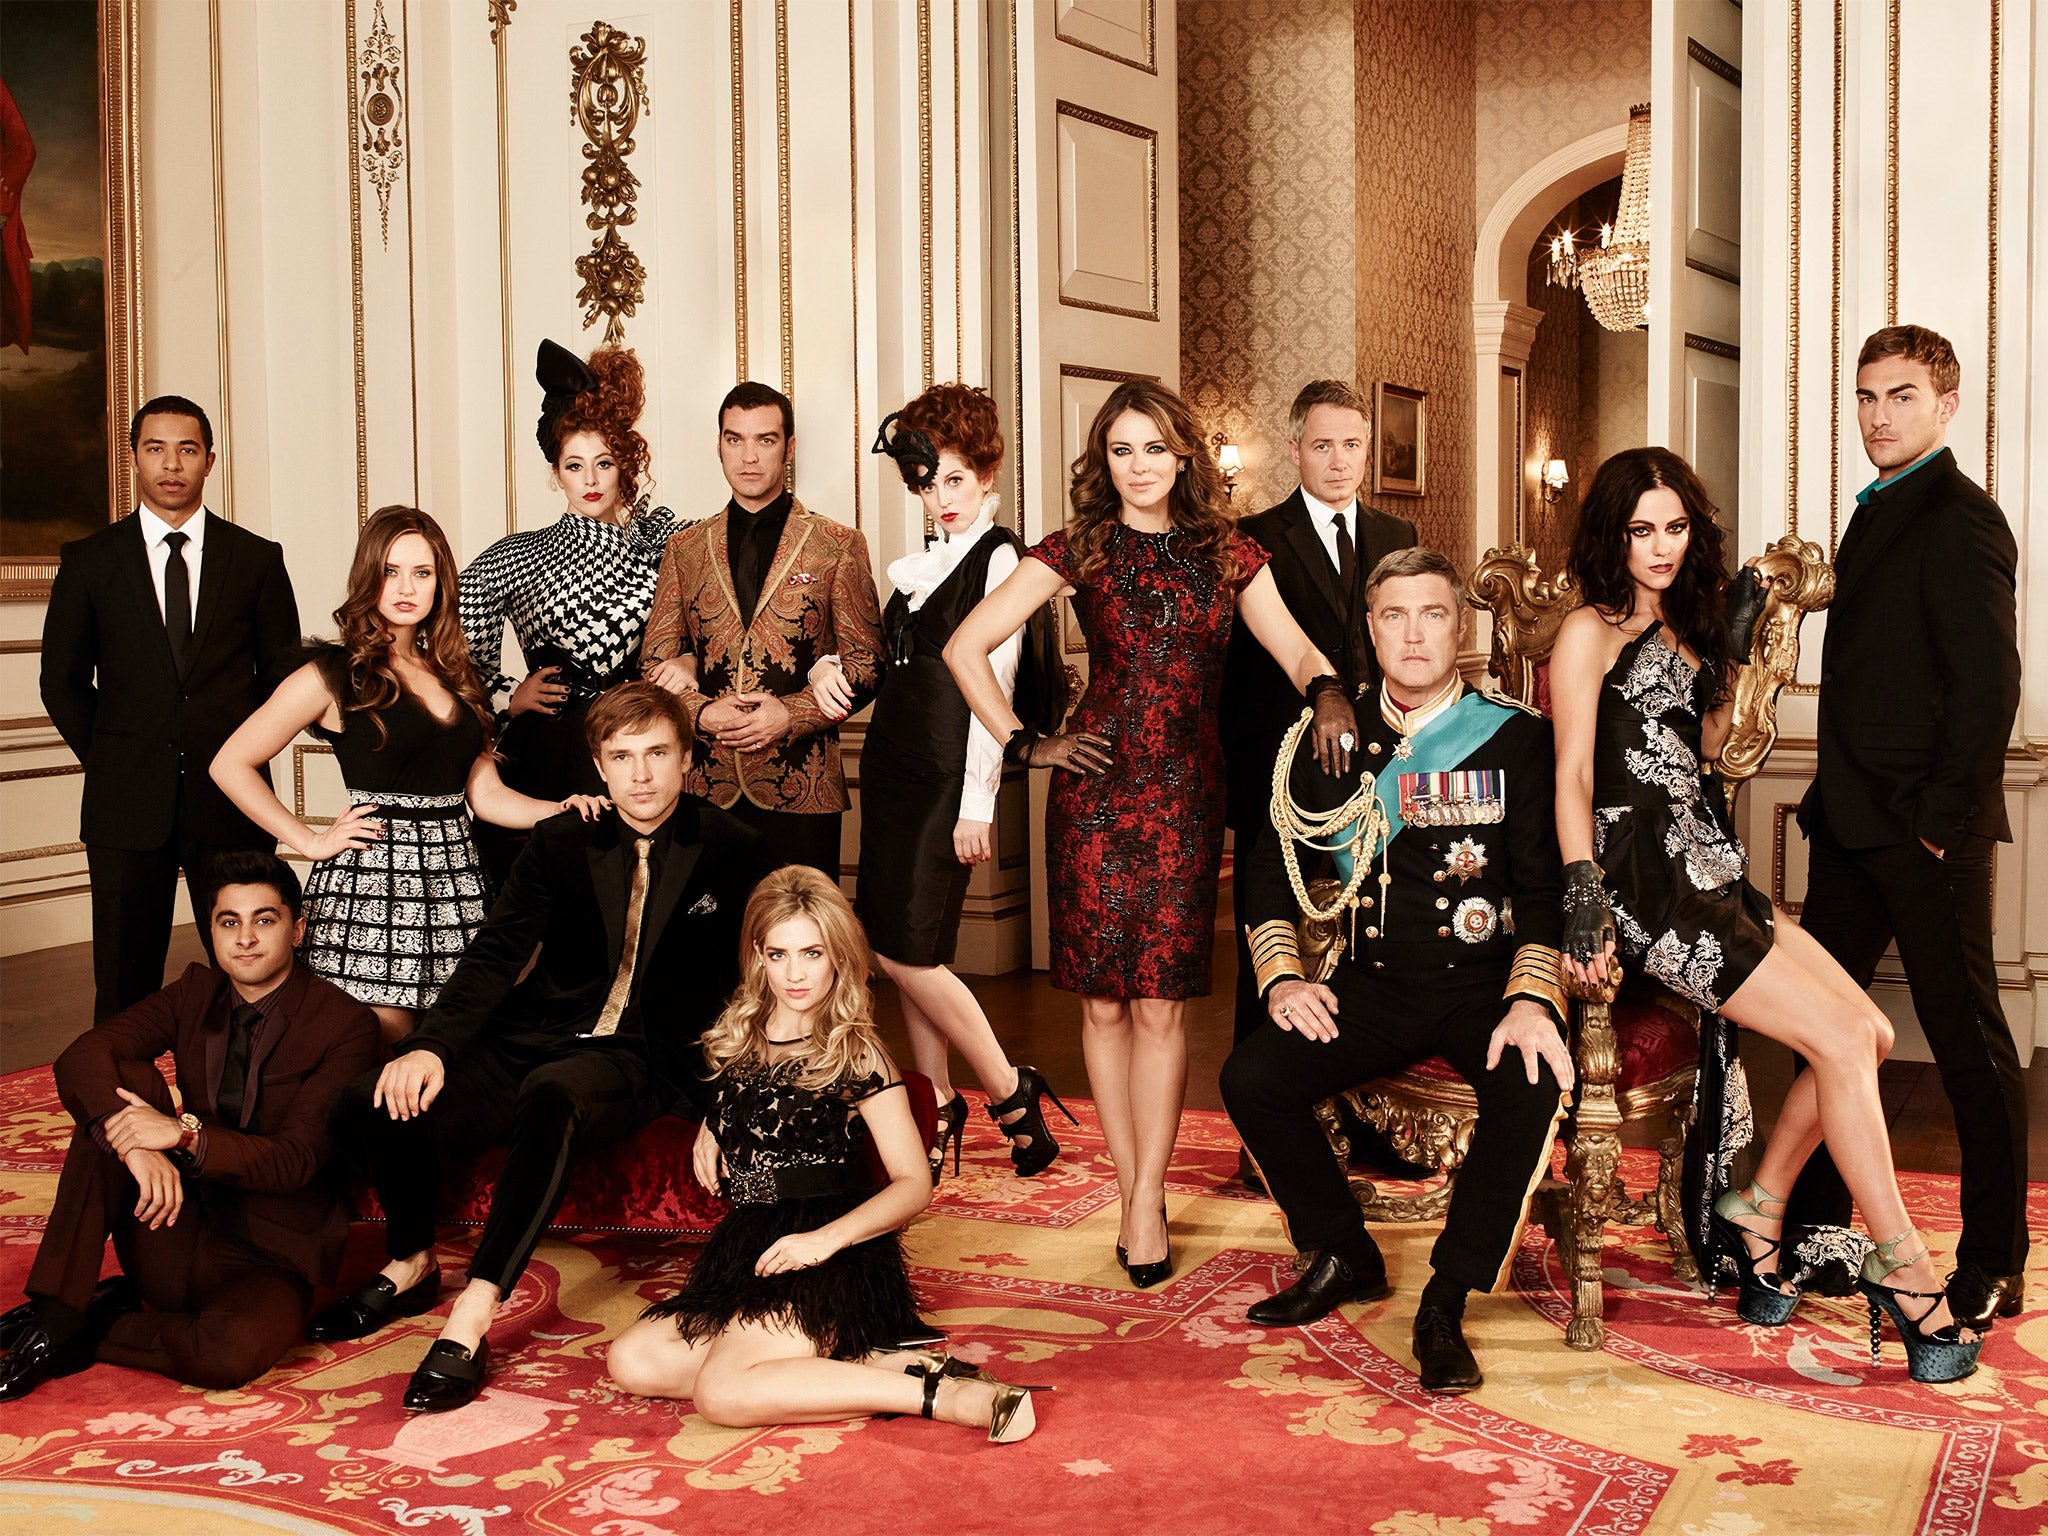 The cast of E's ‘The Royals’